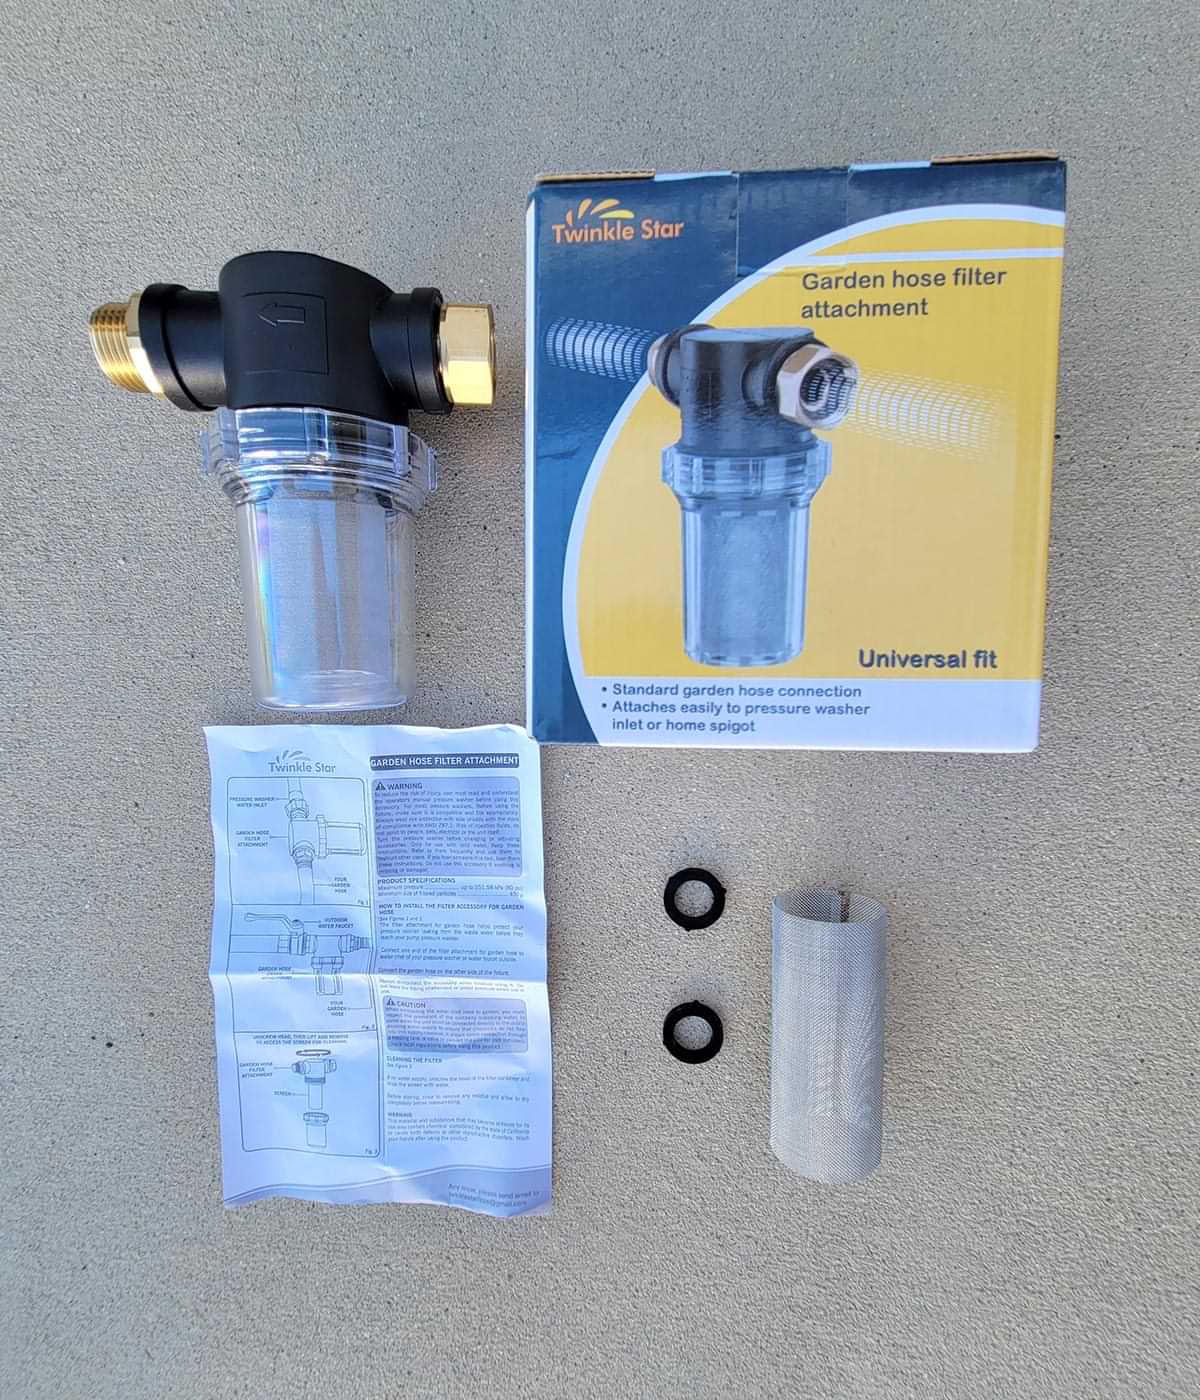 the Twinkle Star Garden Hose Filter Attachment removed from and placed next to its box packaging along with the accompanying mesh filter, and two hose O rings